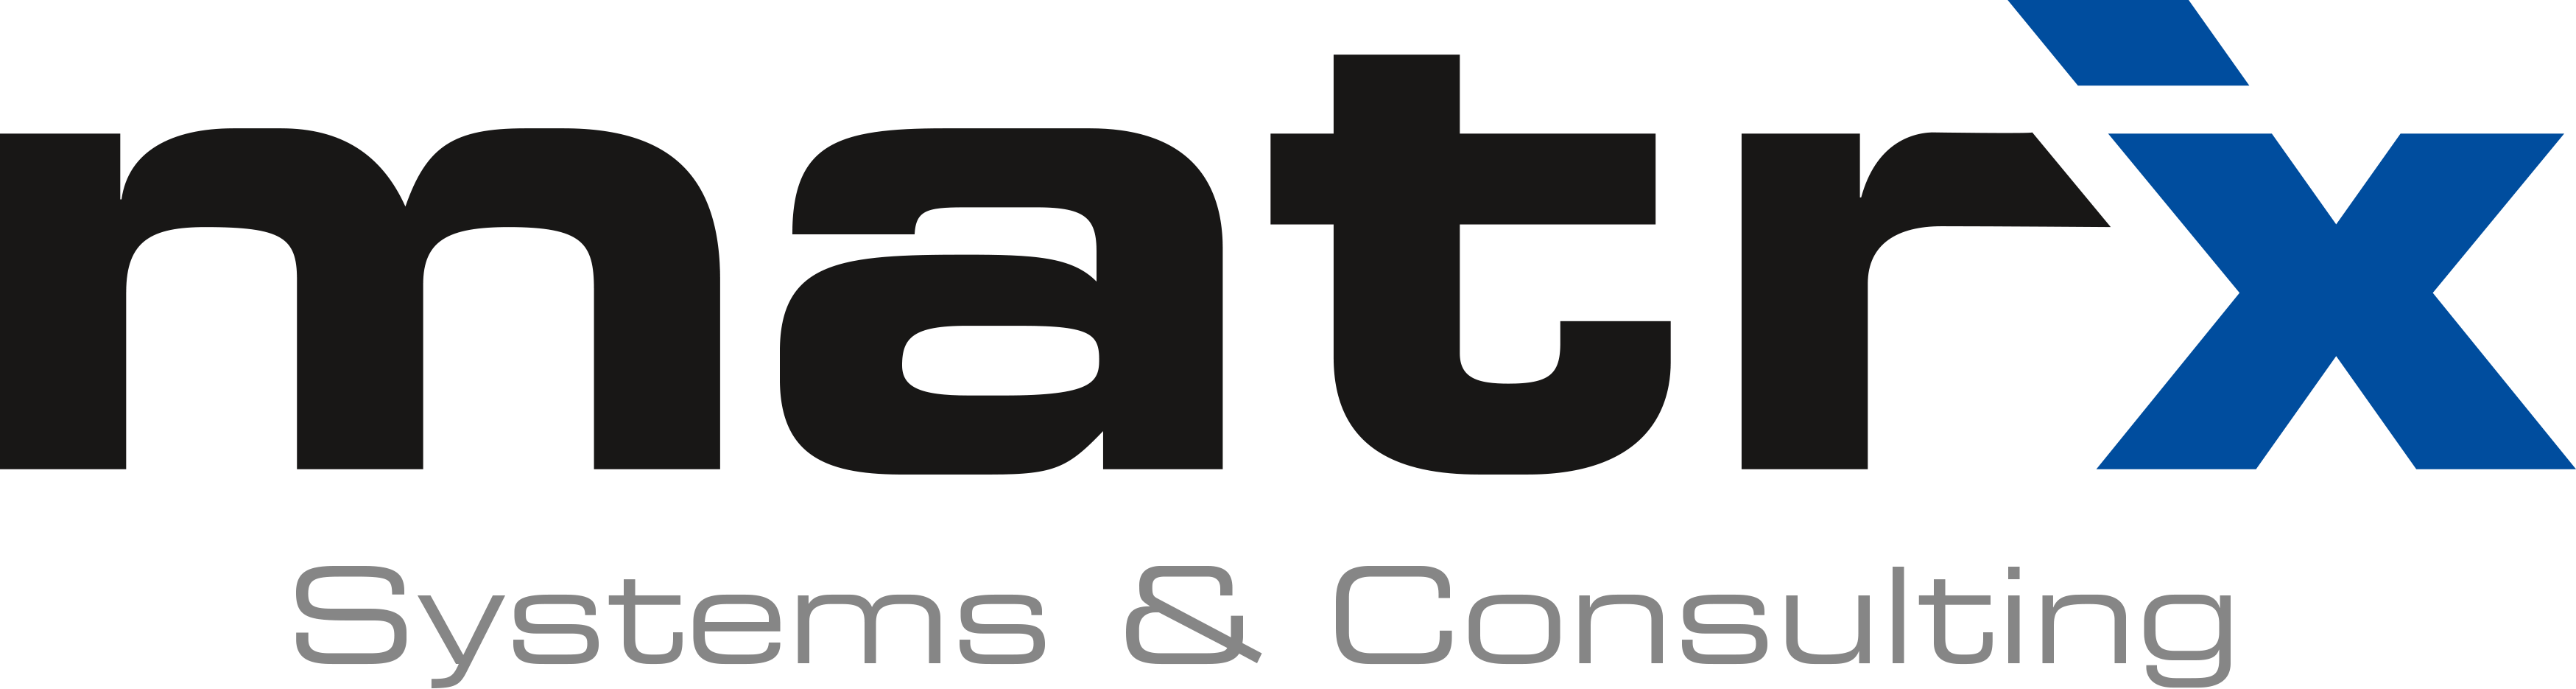 Matrix - Systems & Consulting